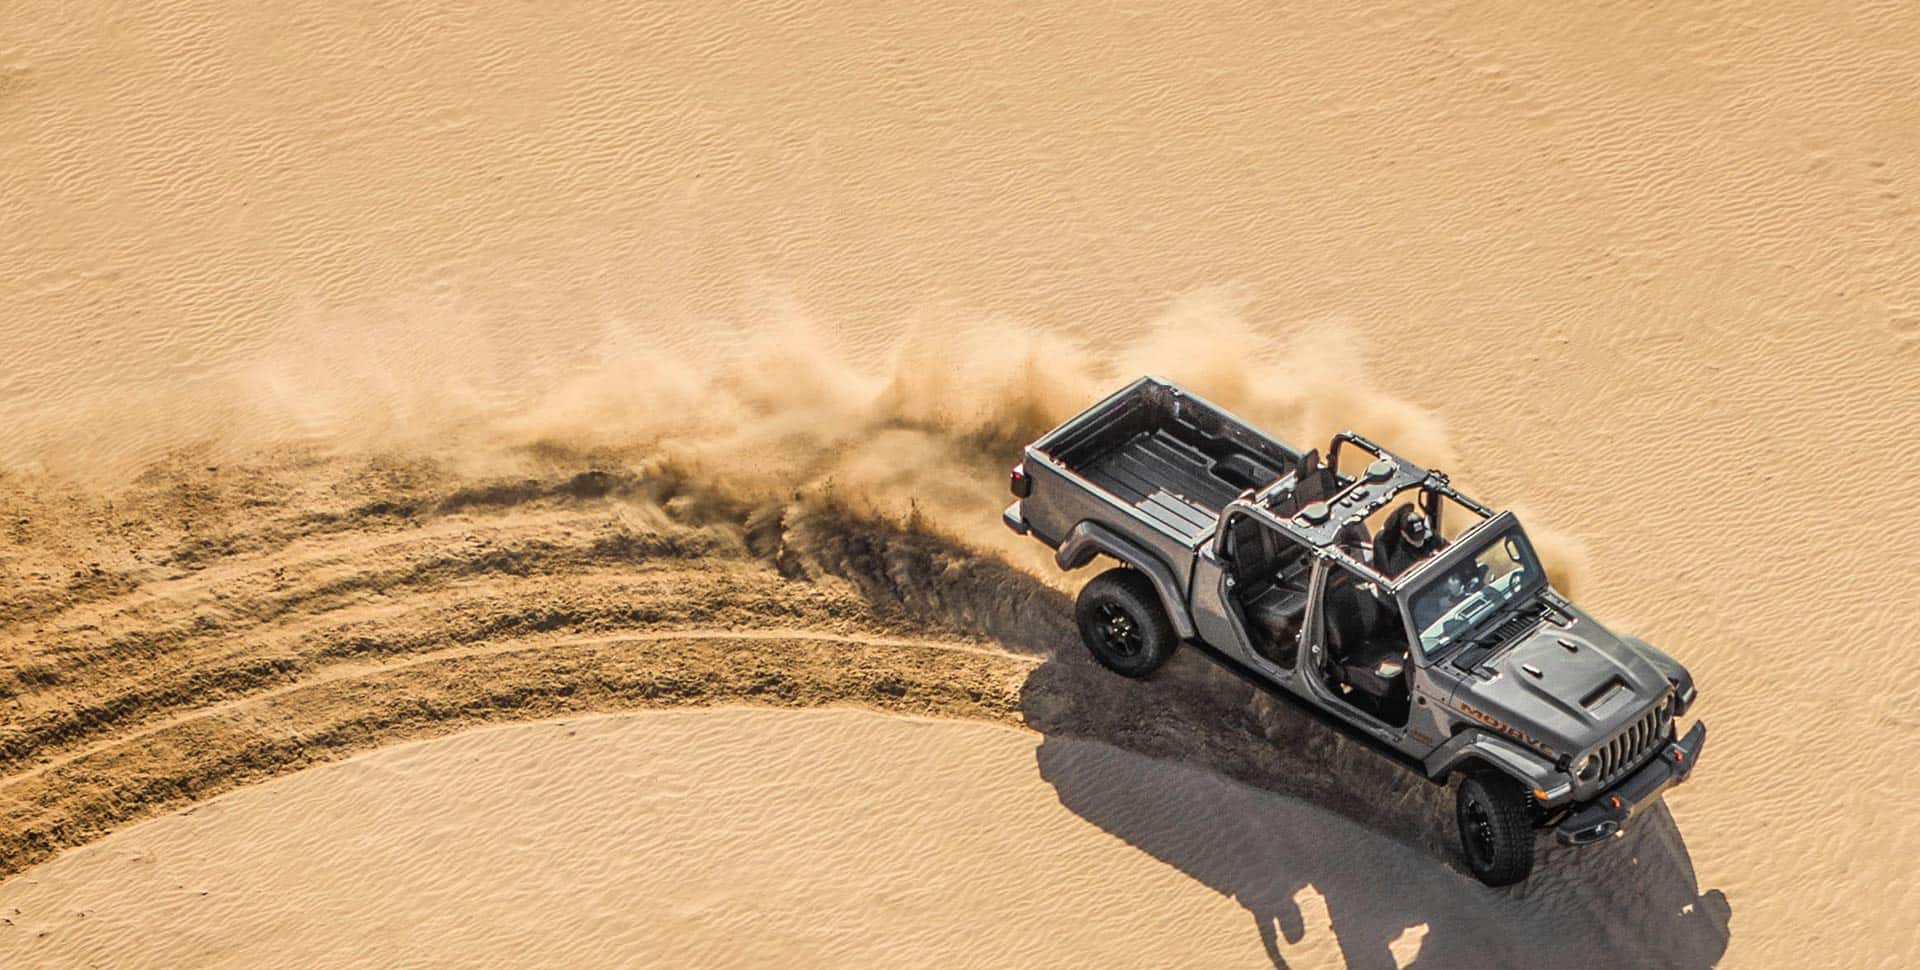 The 2023 Jeep Gladiator Mojave with its top and doors off being driven off-road in the desert with a spray of sand coming from its wheels.